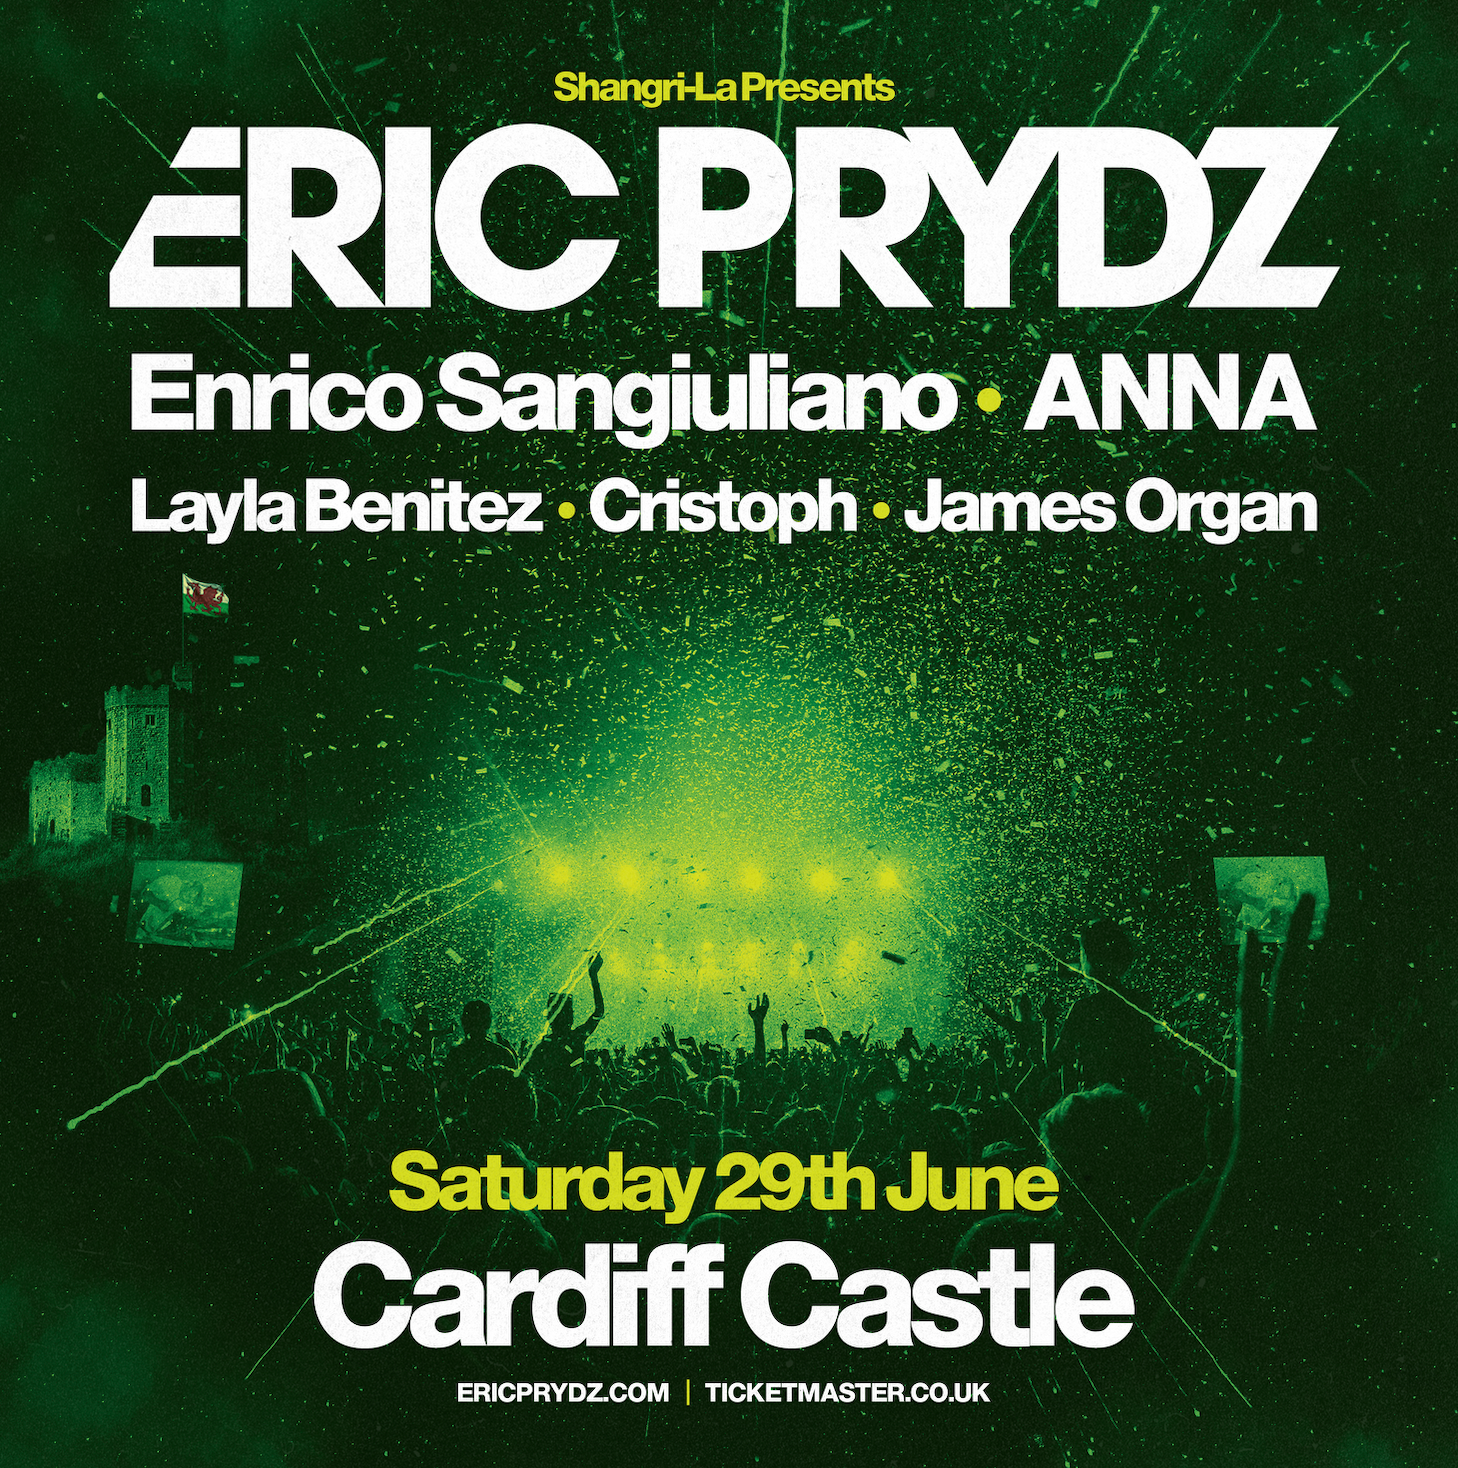 Eric Prydz at Cardiff Castle - フライヤー表